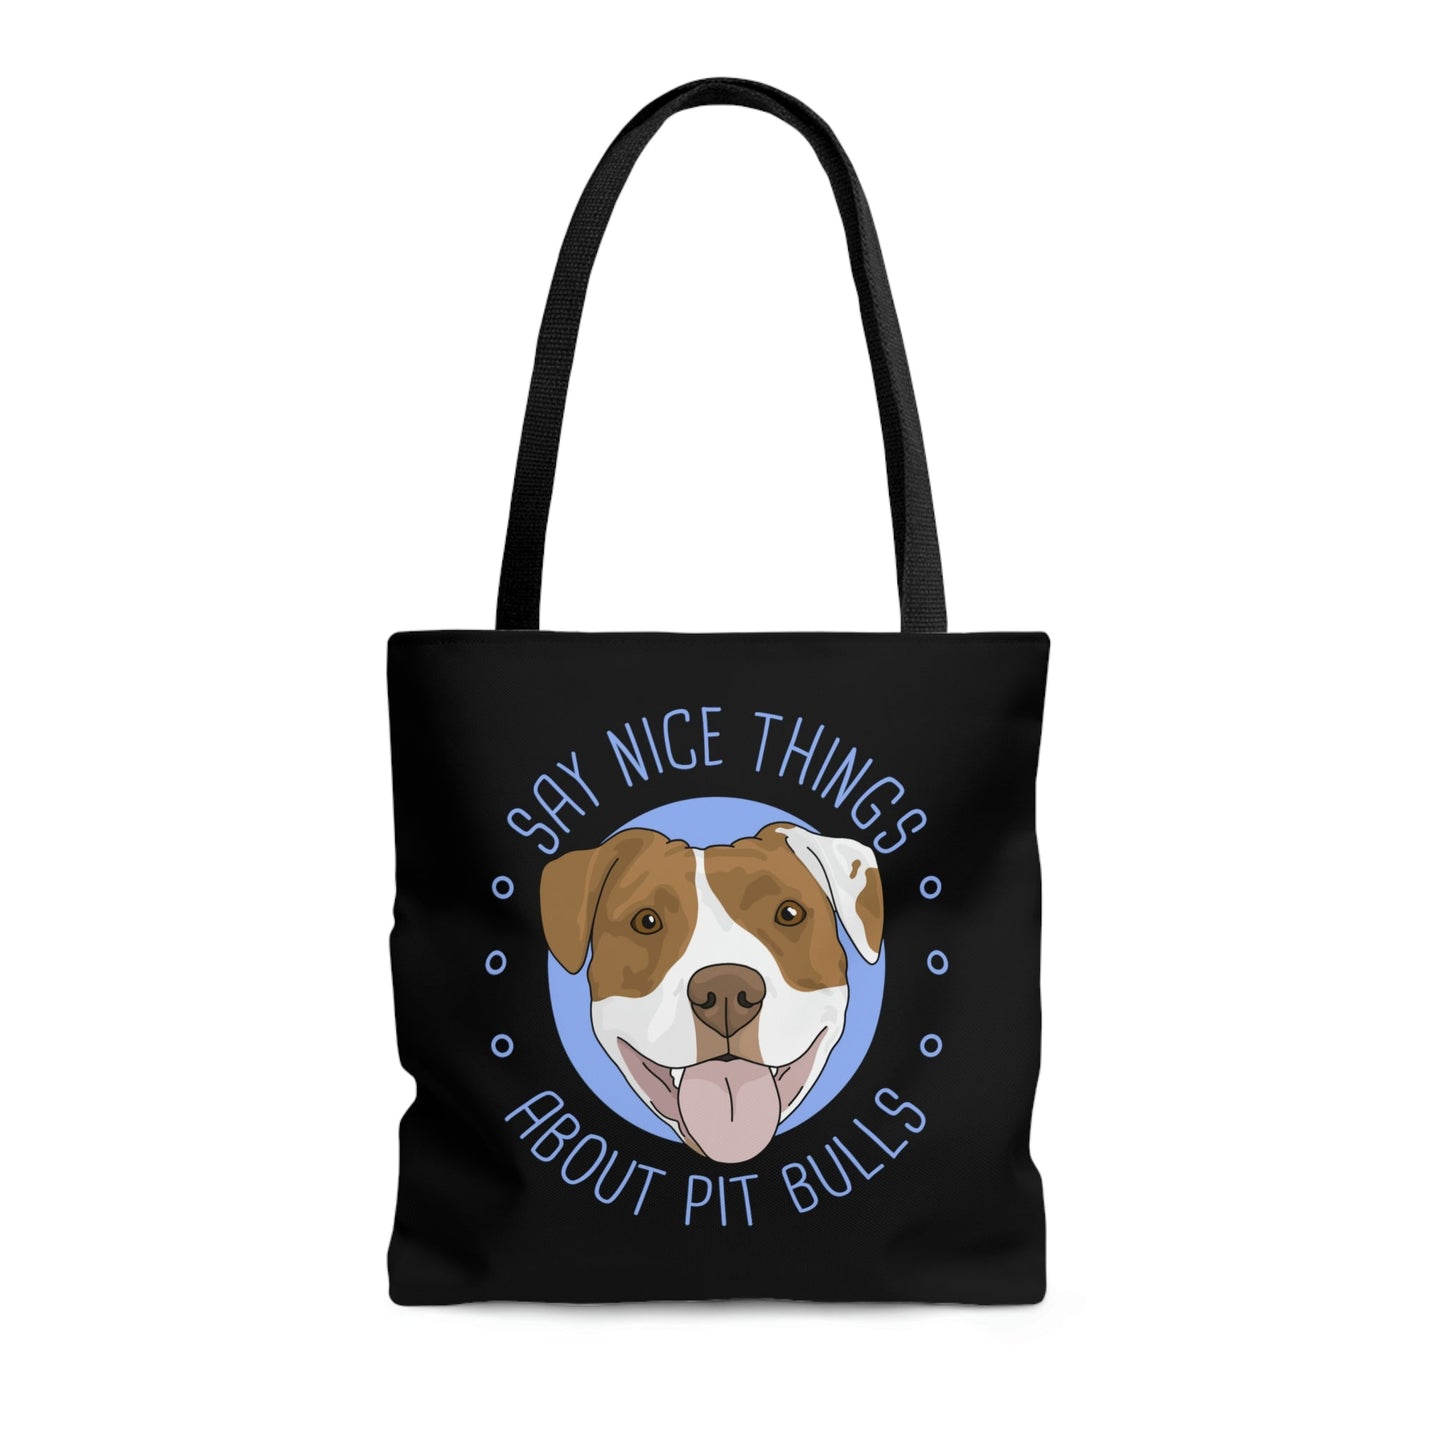 Say Nice Things About Pit Bulls | Tote Bag - Detezi Designs-13354687181675526076